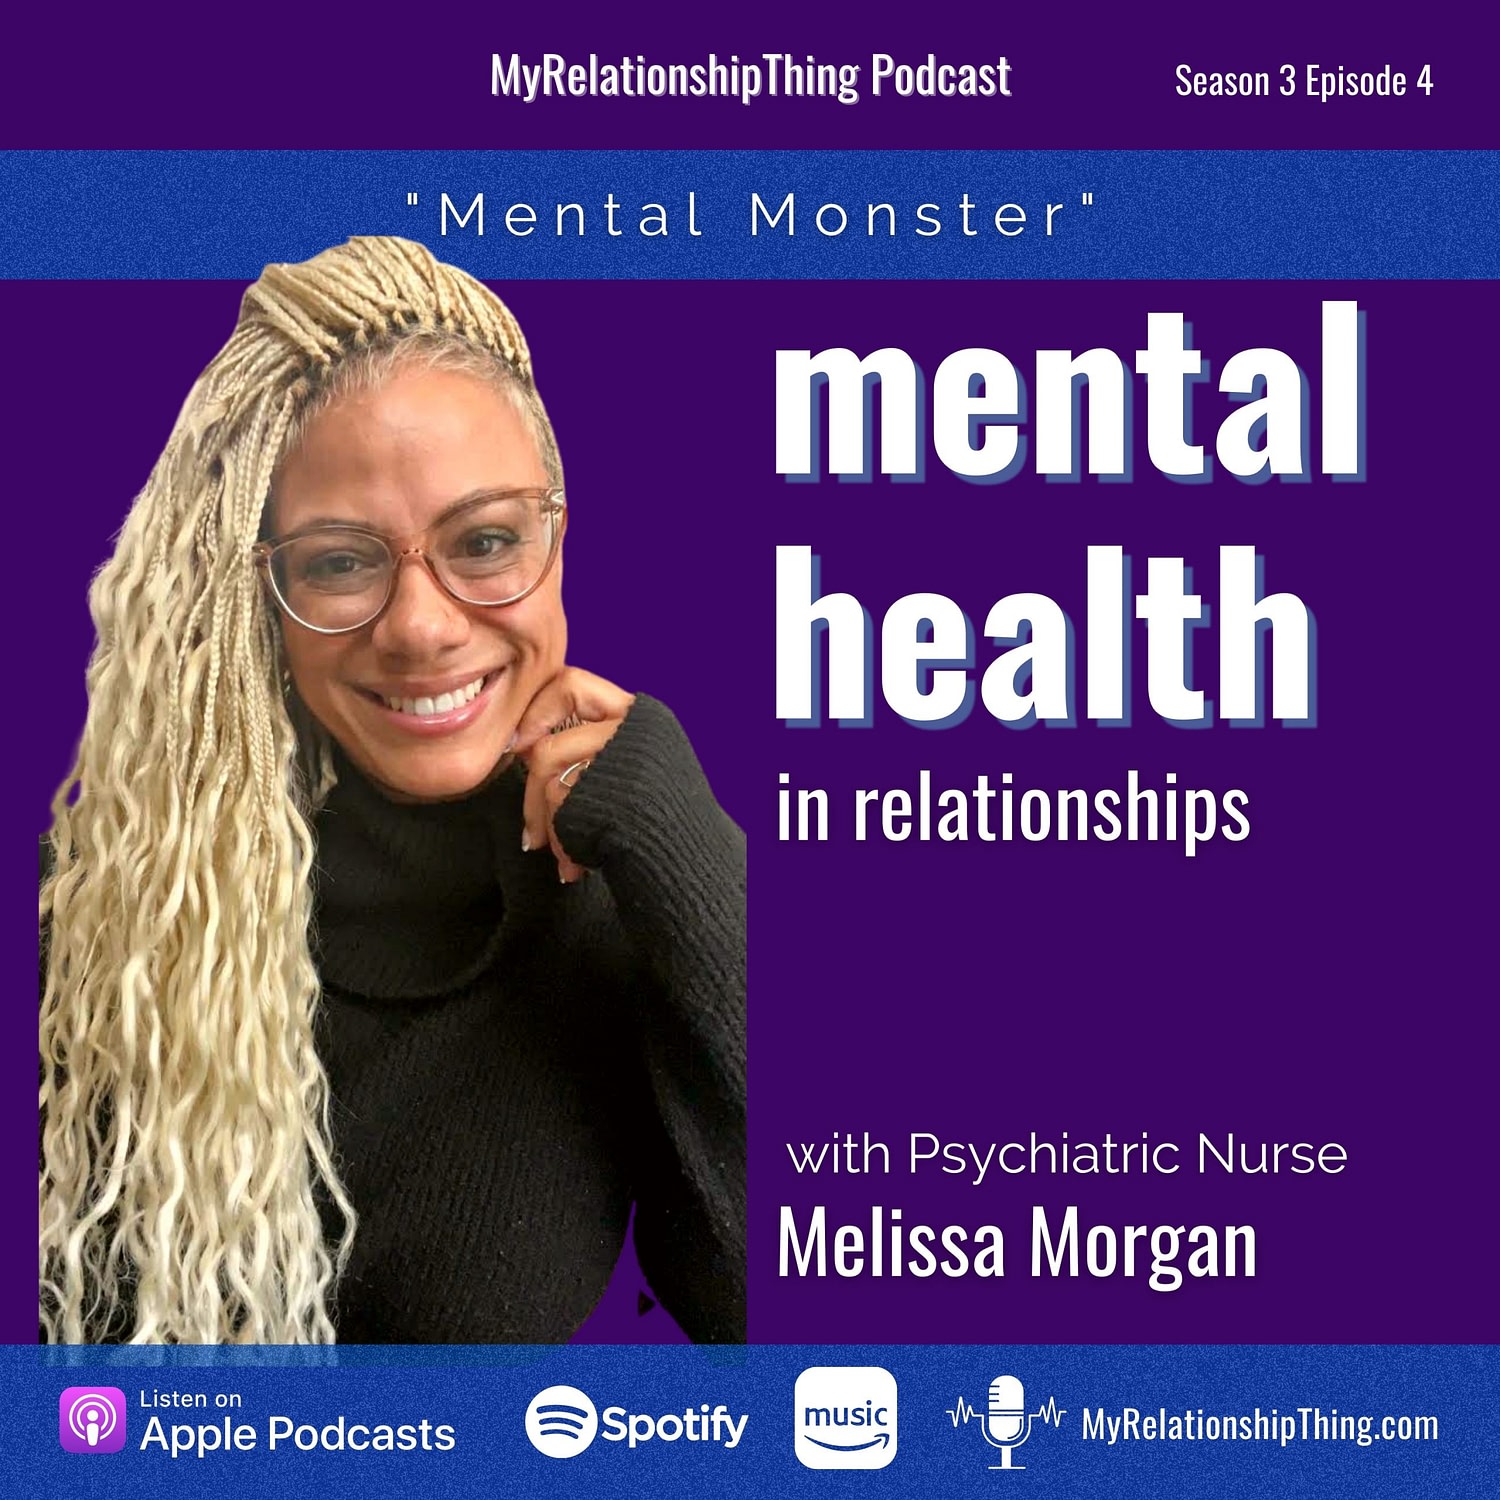 melissa morgan podcast guest on myrelationshipthing mental health in relationships victoria doss henry doss